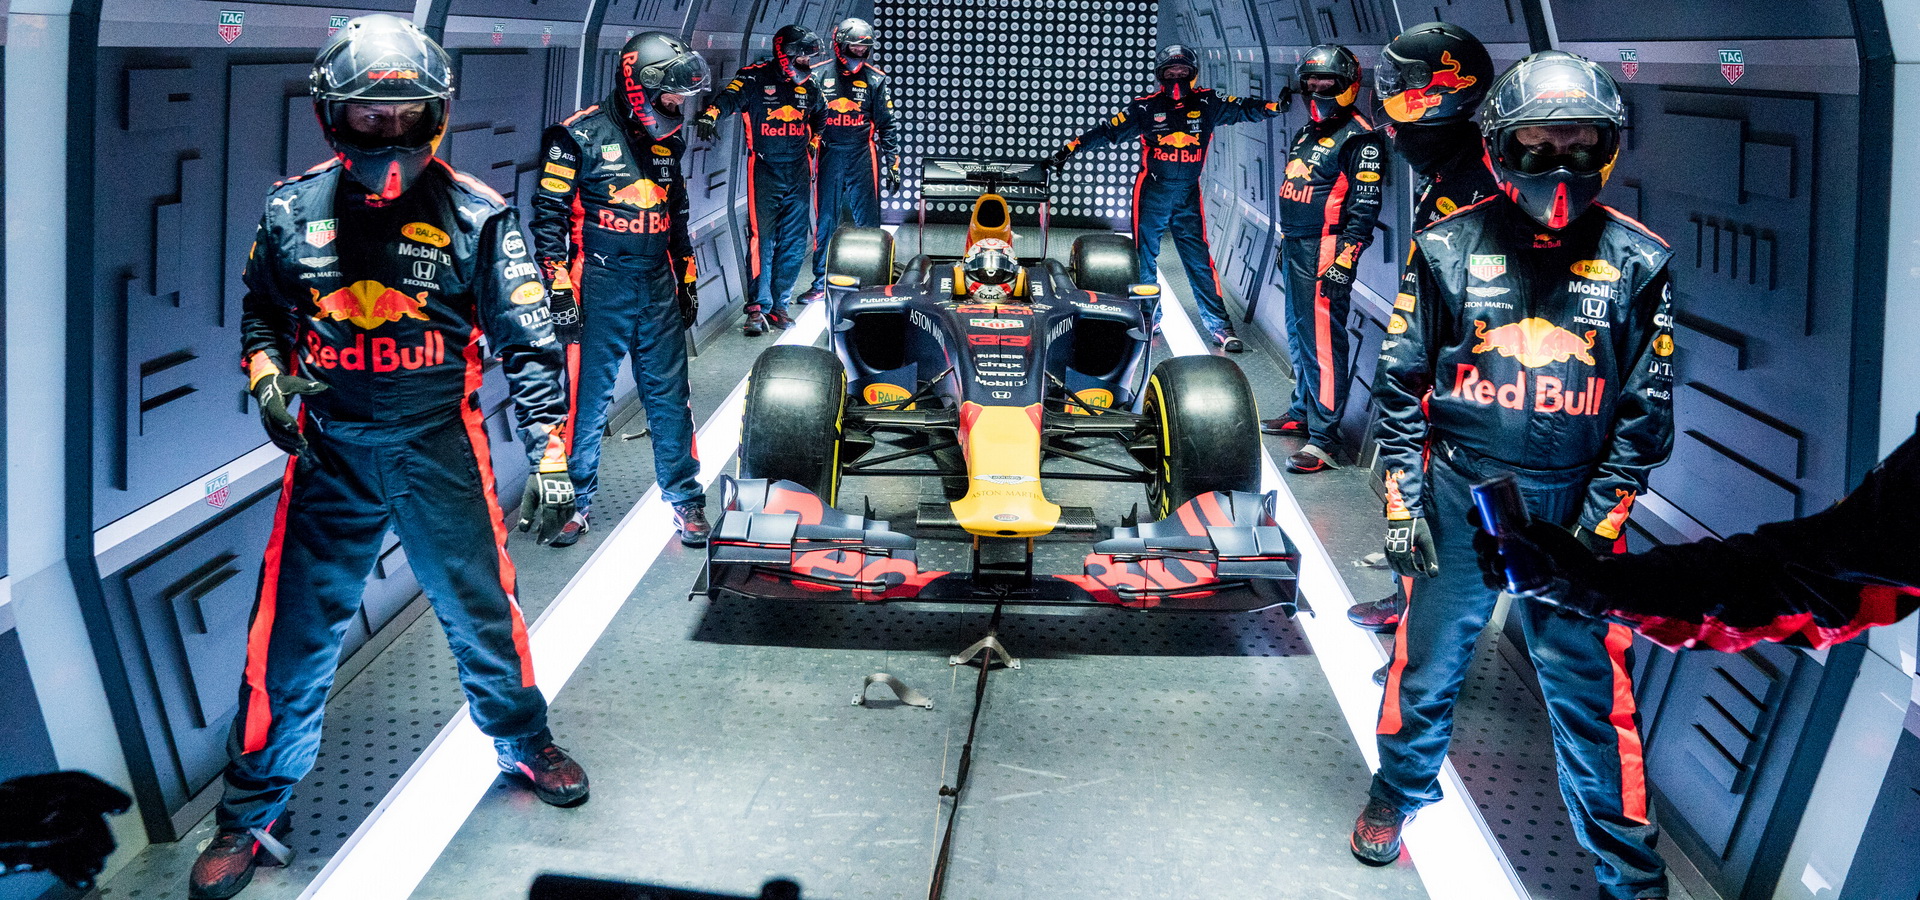 Red Bull Racing Got Bored, So They Performed A Zero Gravity Pit Stop.